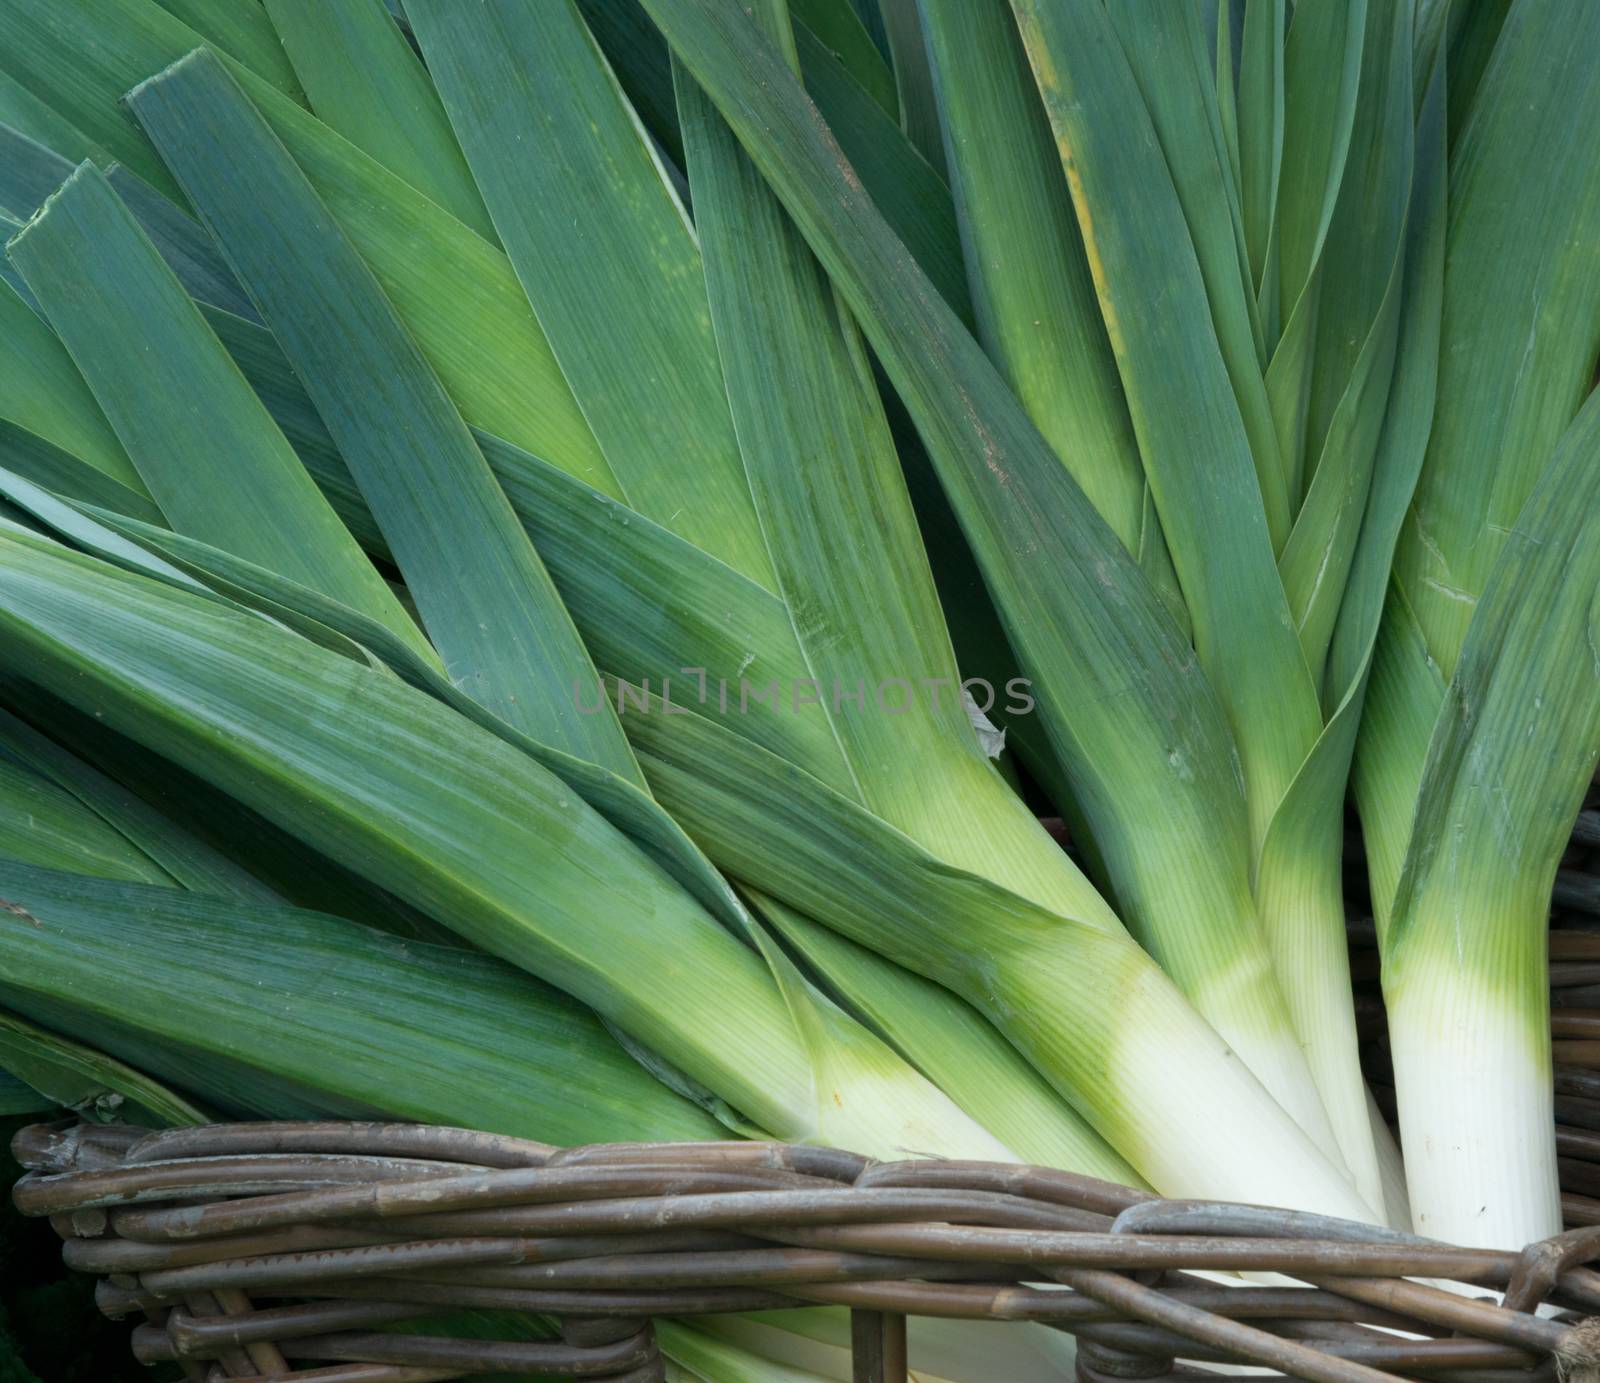 Fresh Leeks on a Market Stall by TimAwe